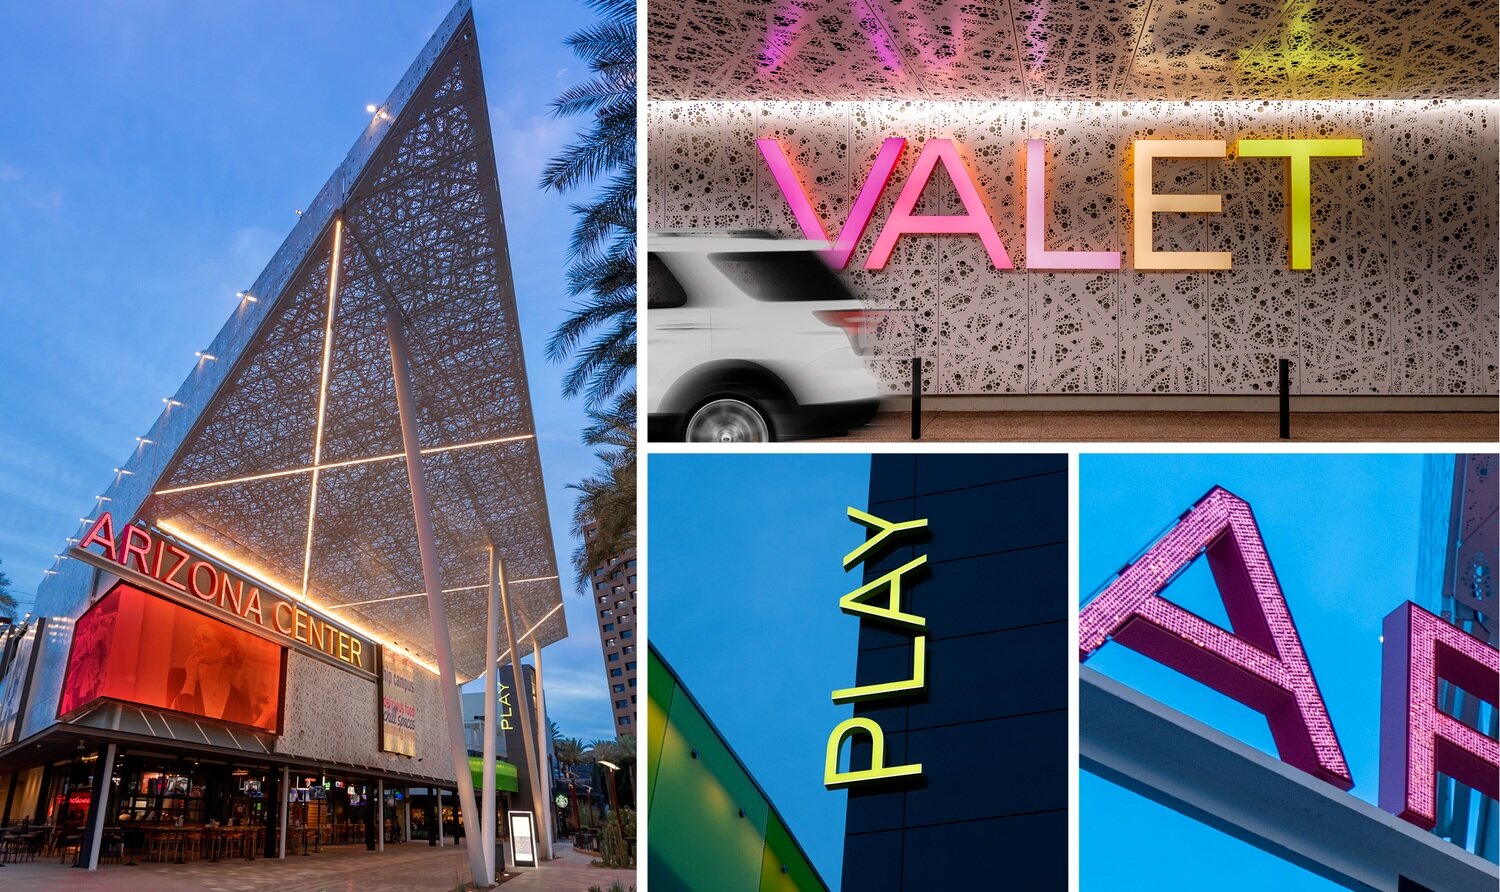 From vehicular to pedestrian scales, the renovated Arizona Center activates the surrounding streets and places with vibrant graphics, signage, landscape and lighting.